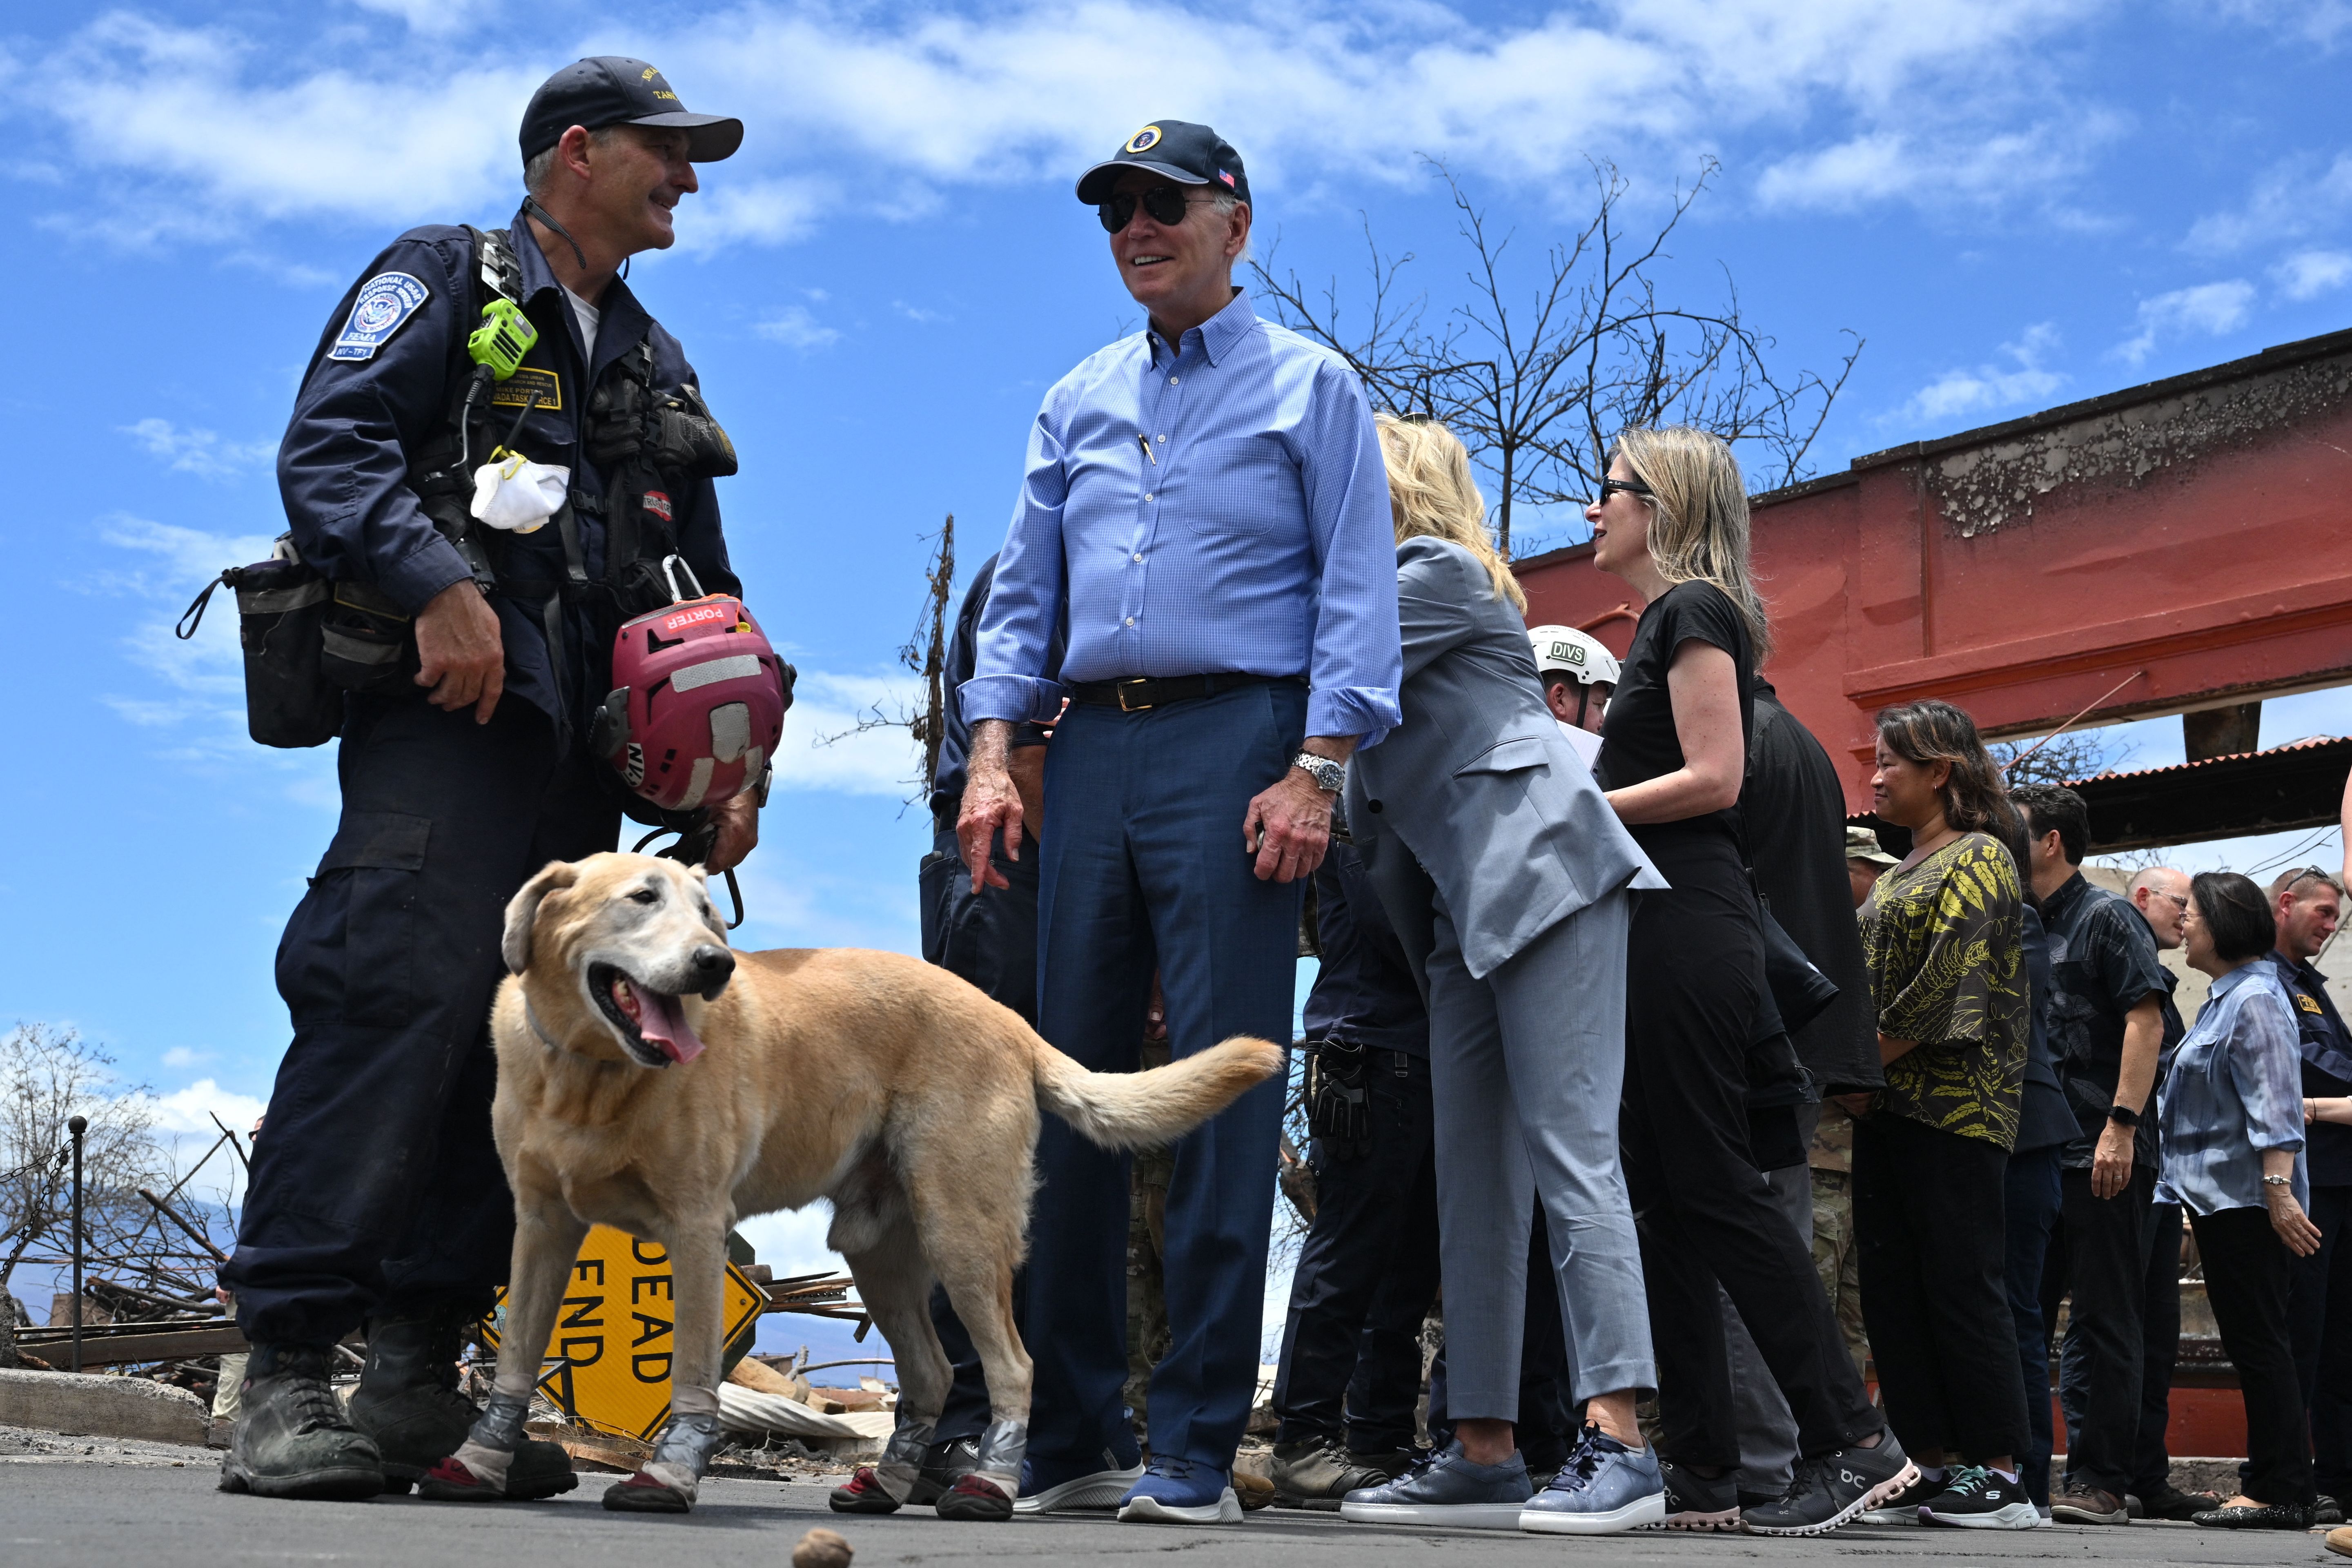 President Joe Biden (C) greets a rescue dog wearing protective boots as he meets with first responders during an operational briefing on response and recovery efforts following wildfires in Lahaina, Hawaii on August 21, 2023. The Bidens are expected to meet with first responders, survivors, and local officials following deadly wildfires in Maui.